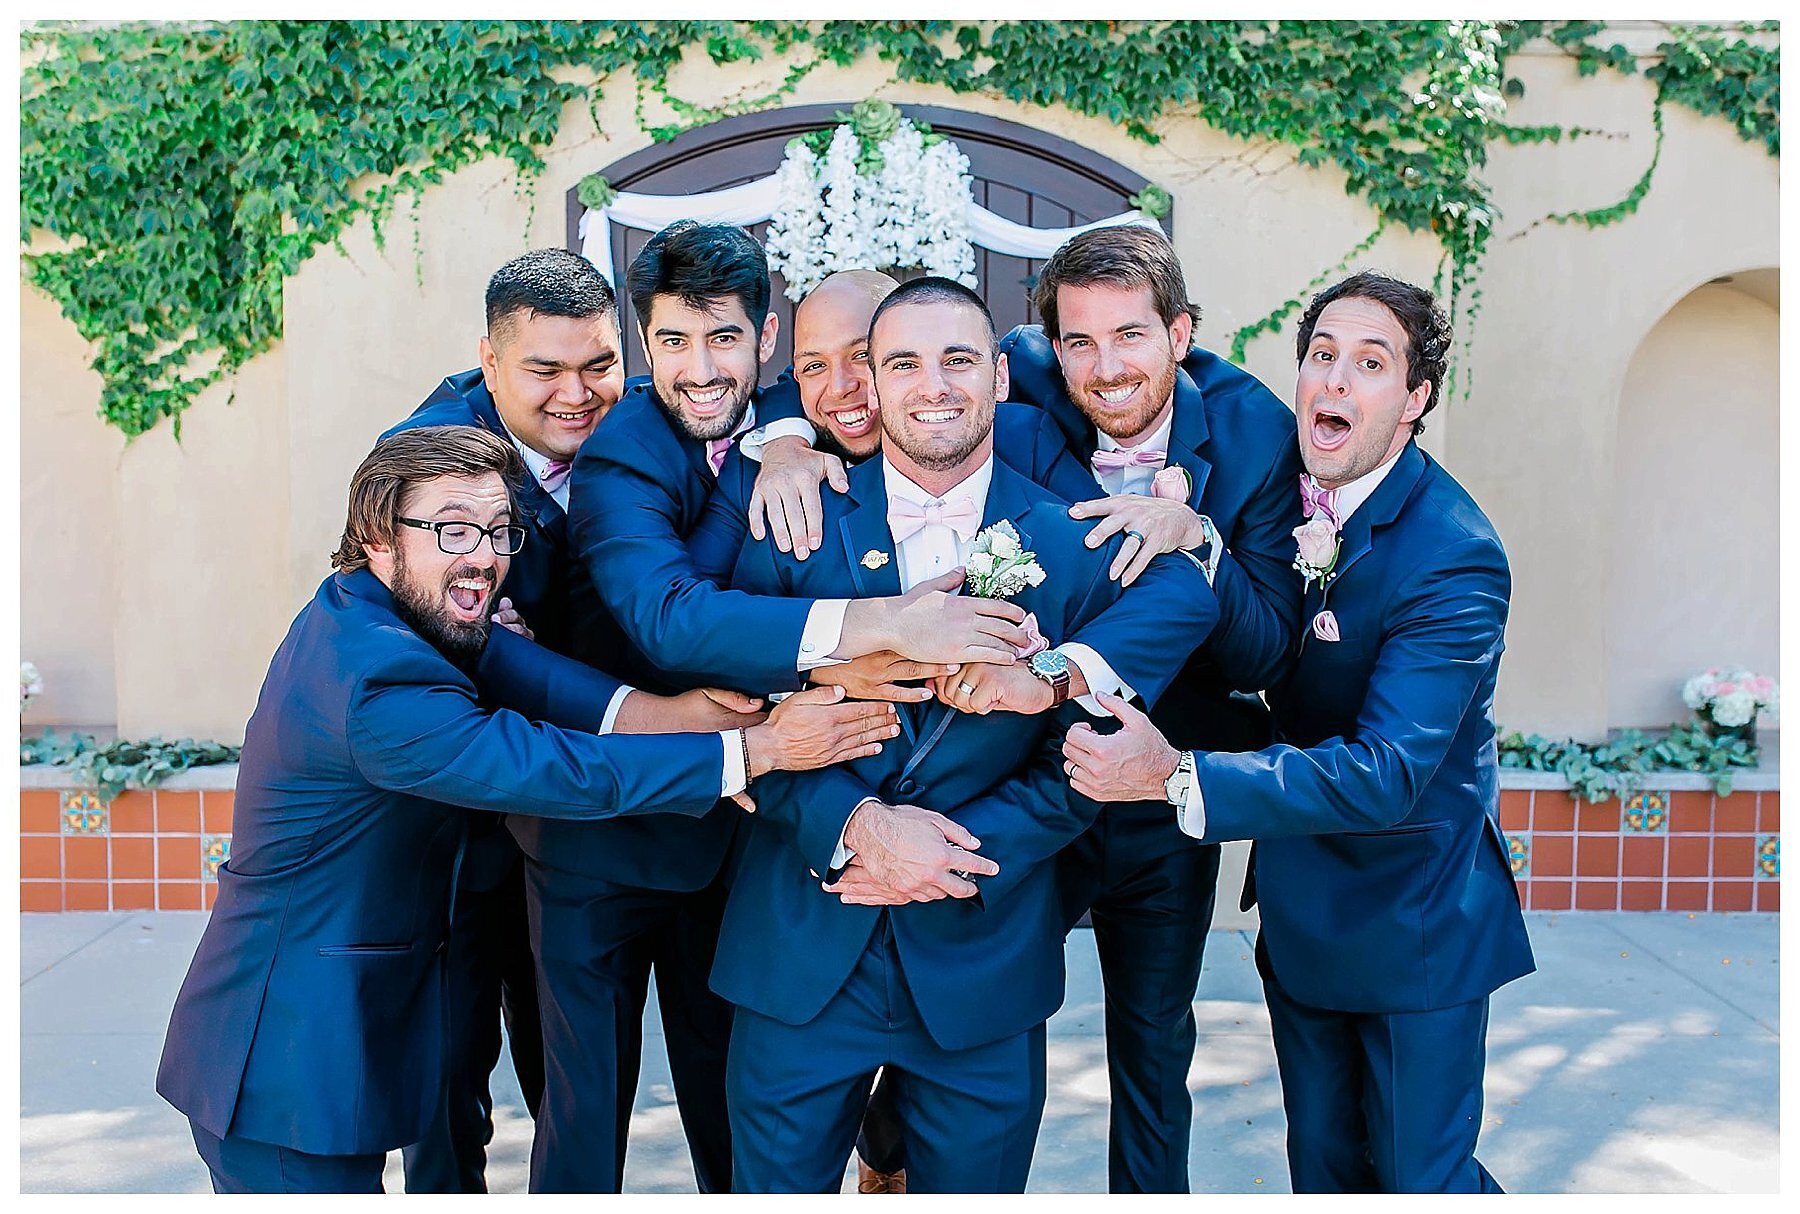  groomsmen hyping up the groom in front of the venue entrance 